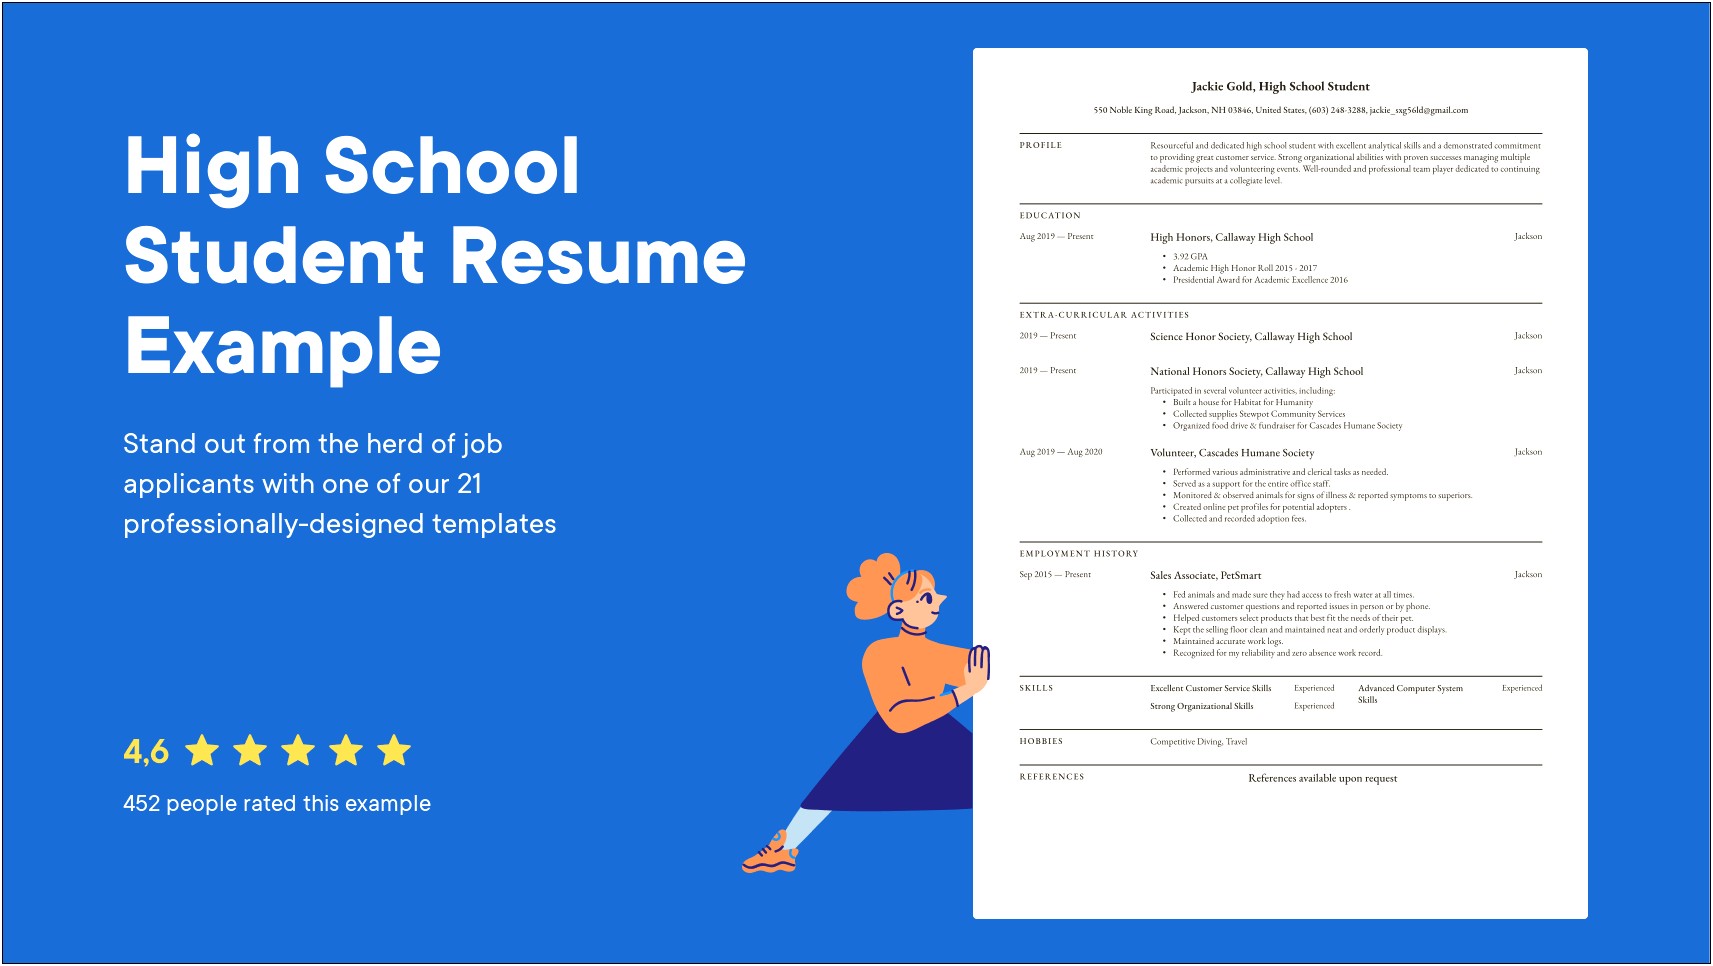 Discuss Education For High Schooler On Resume